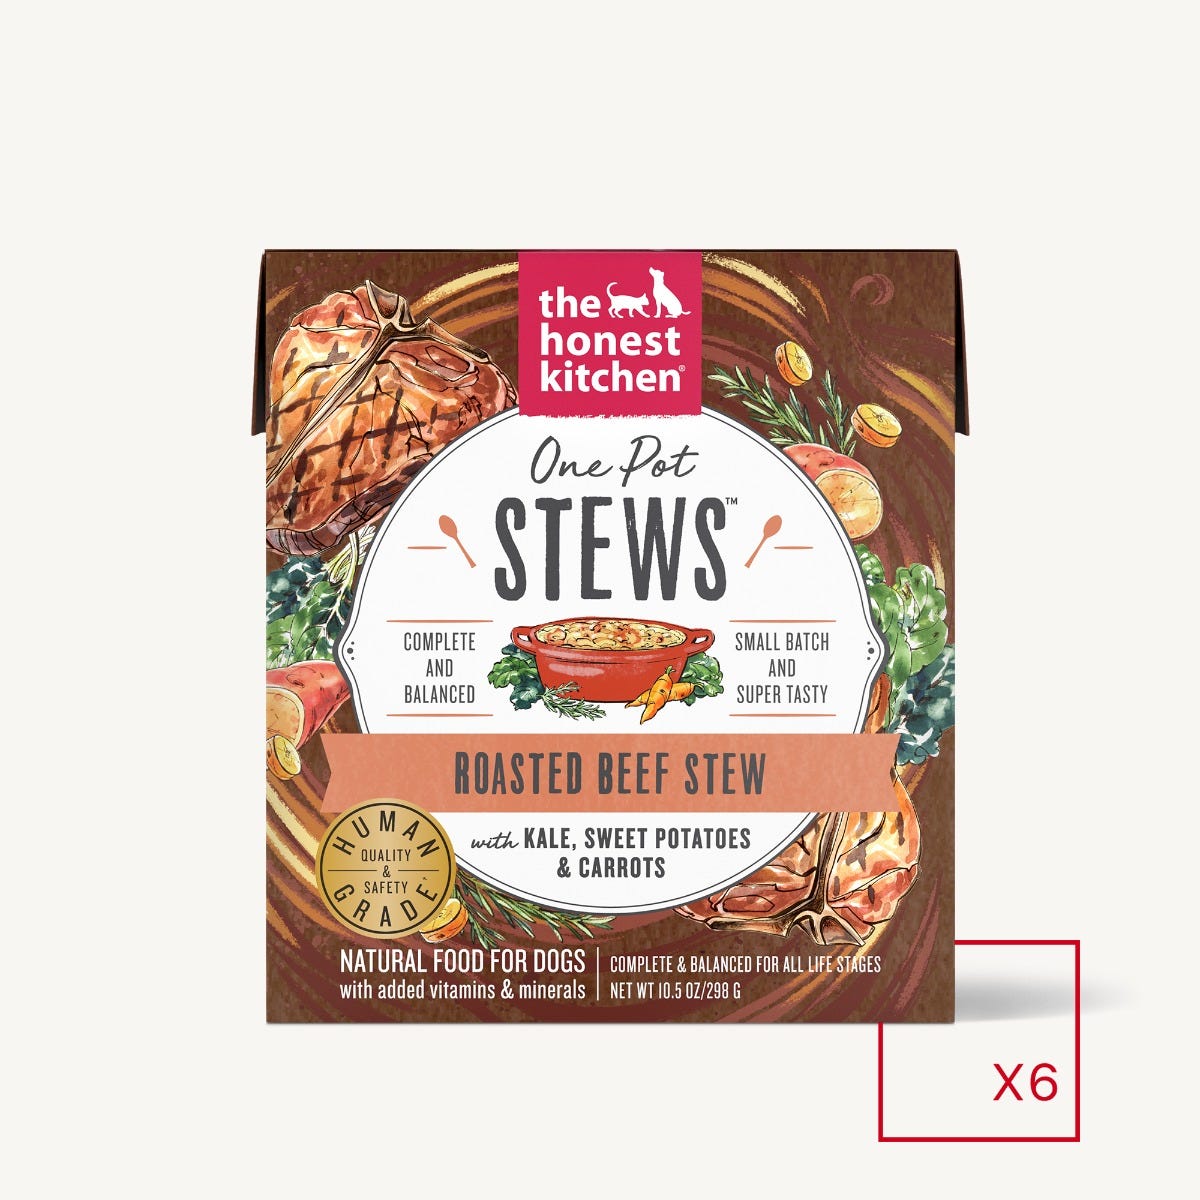 The Honest Kitchen -One Pot Stews - Roasted Beef Stew with Kale, Sweet Potatoes & Carrots (Wet Dog Food)